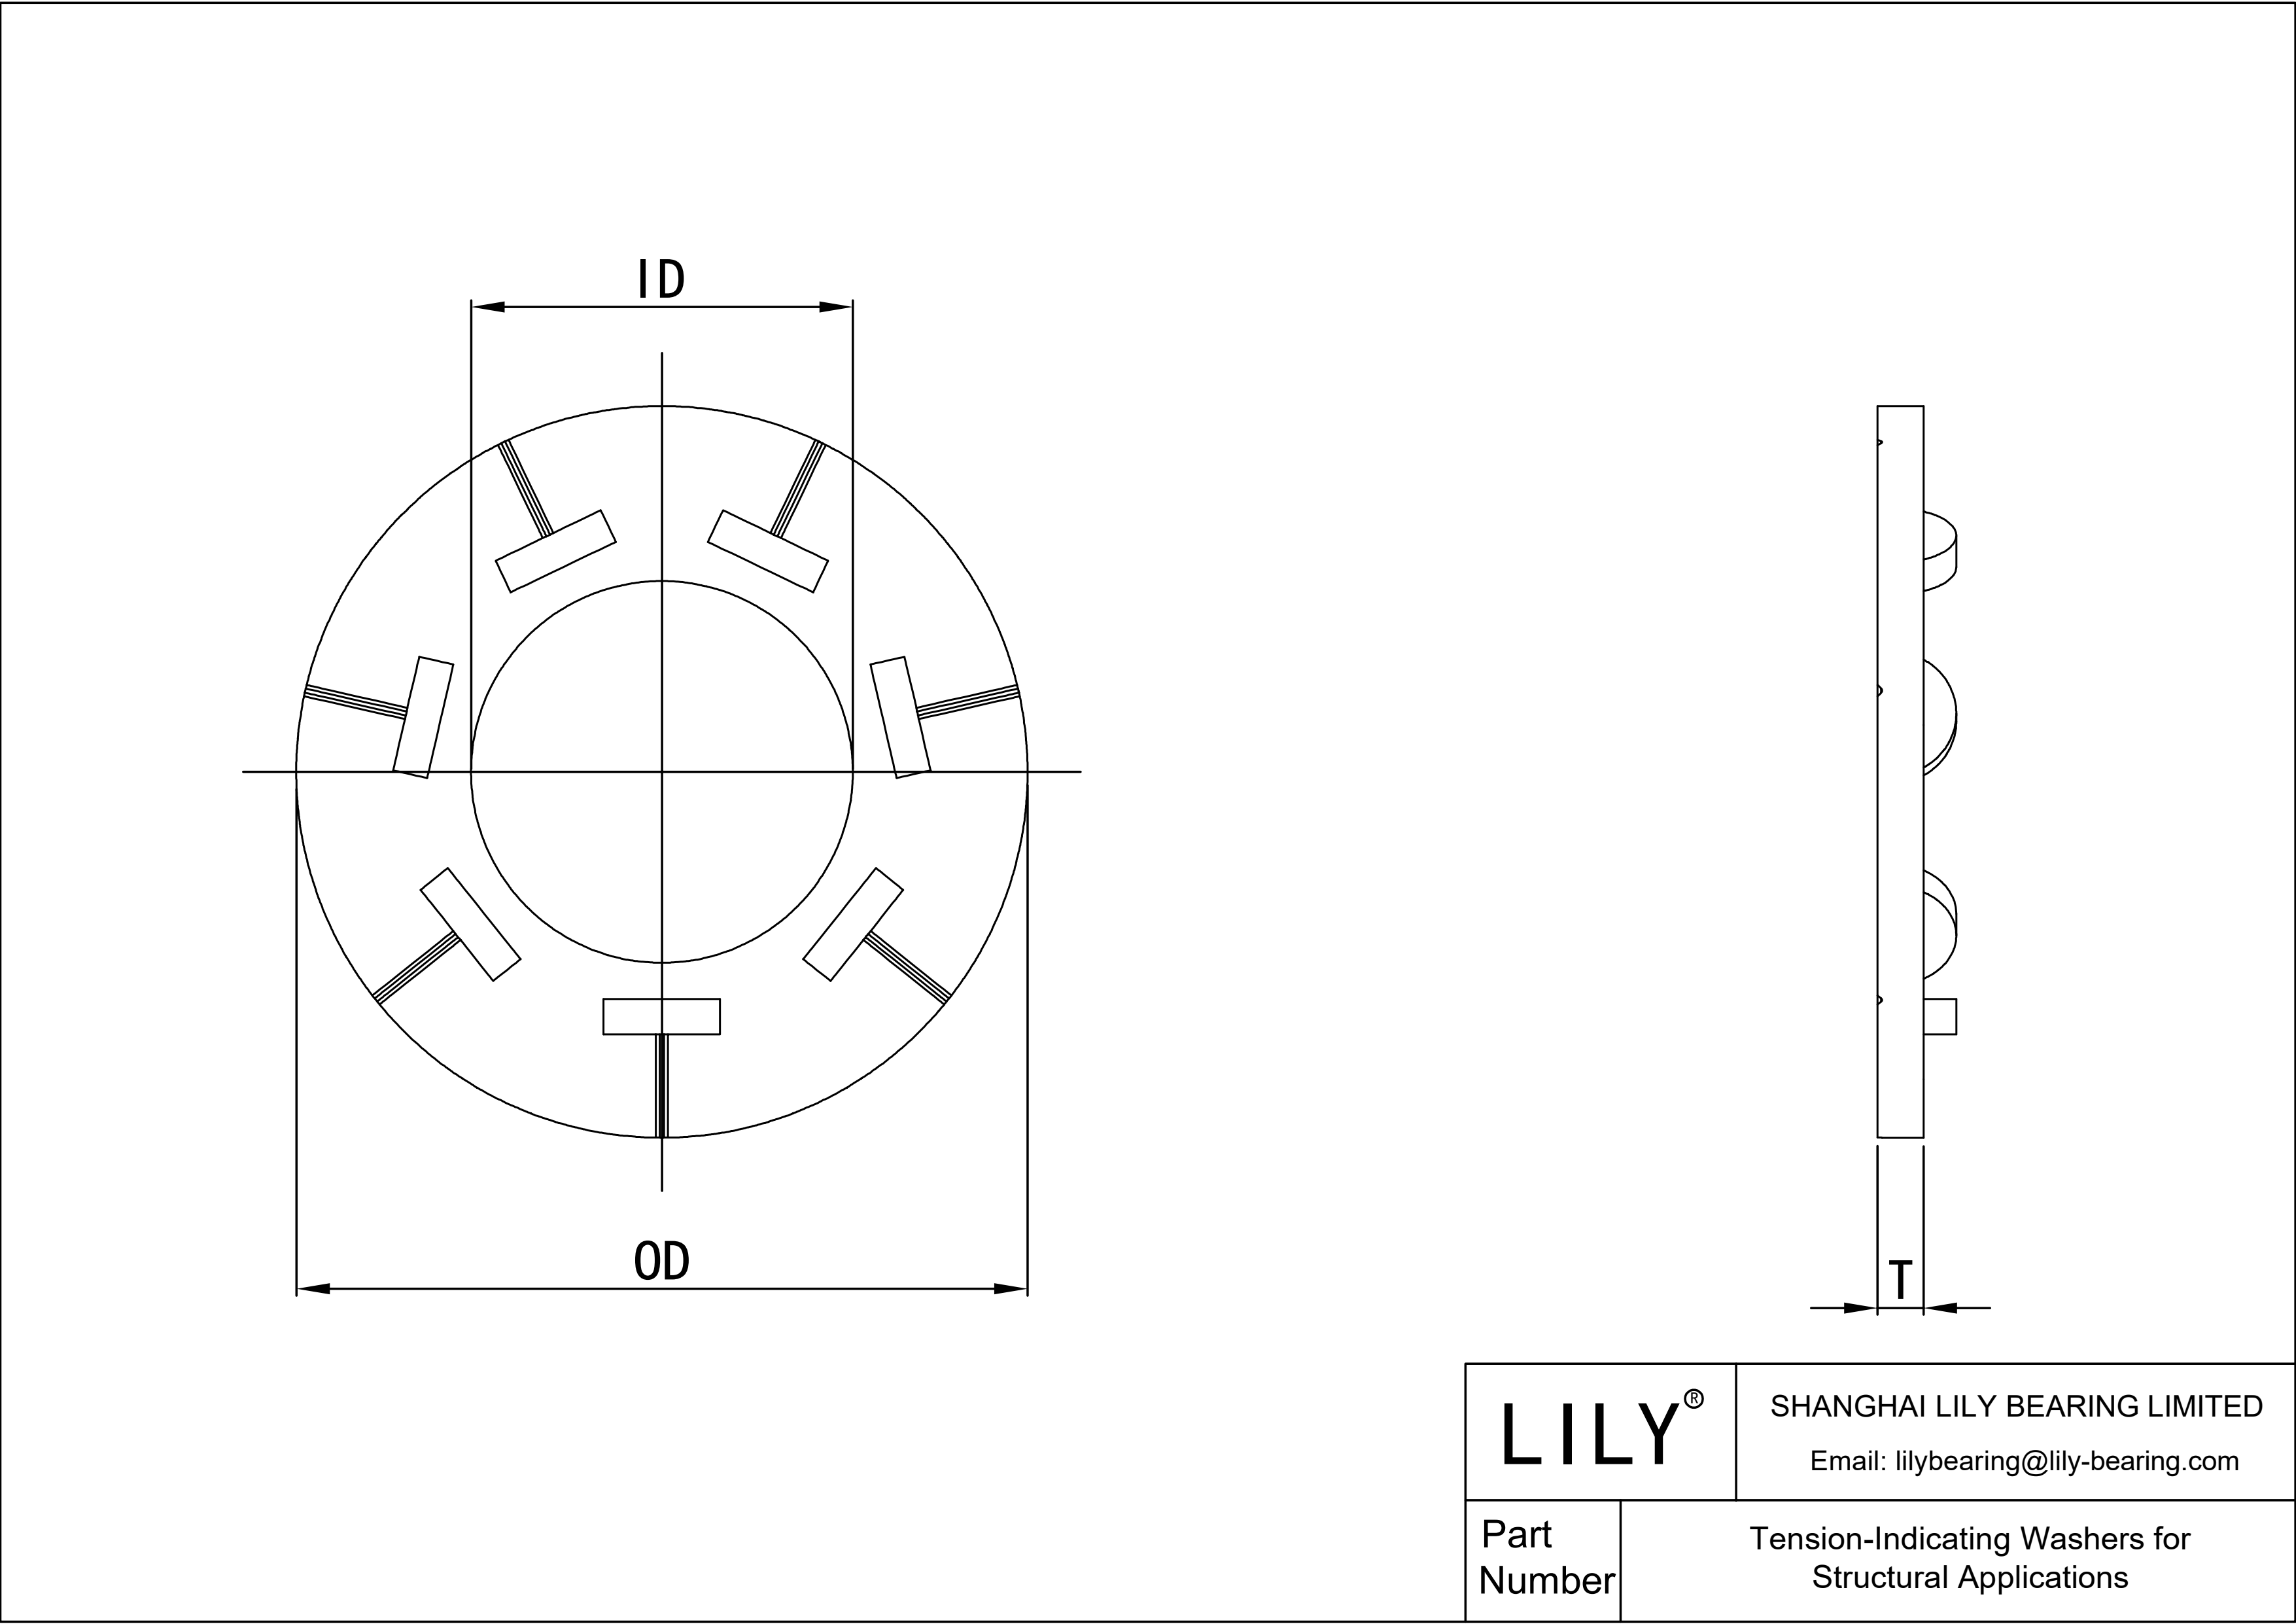 JFDEIABBH Tension-Indicating Washers for Structural Applications cad drawing